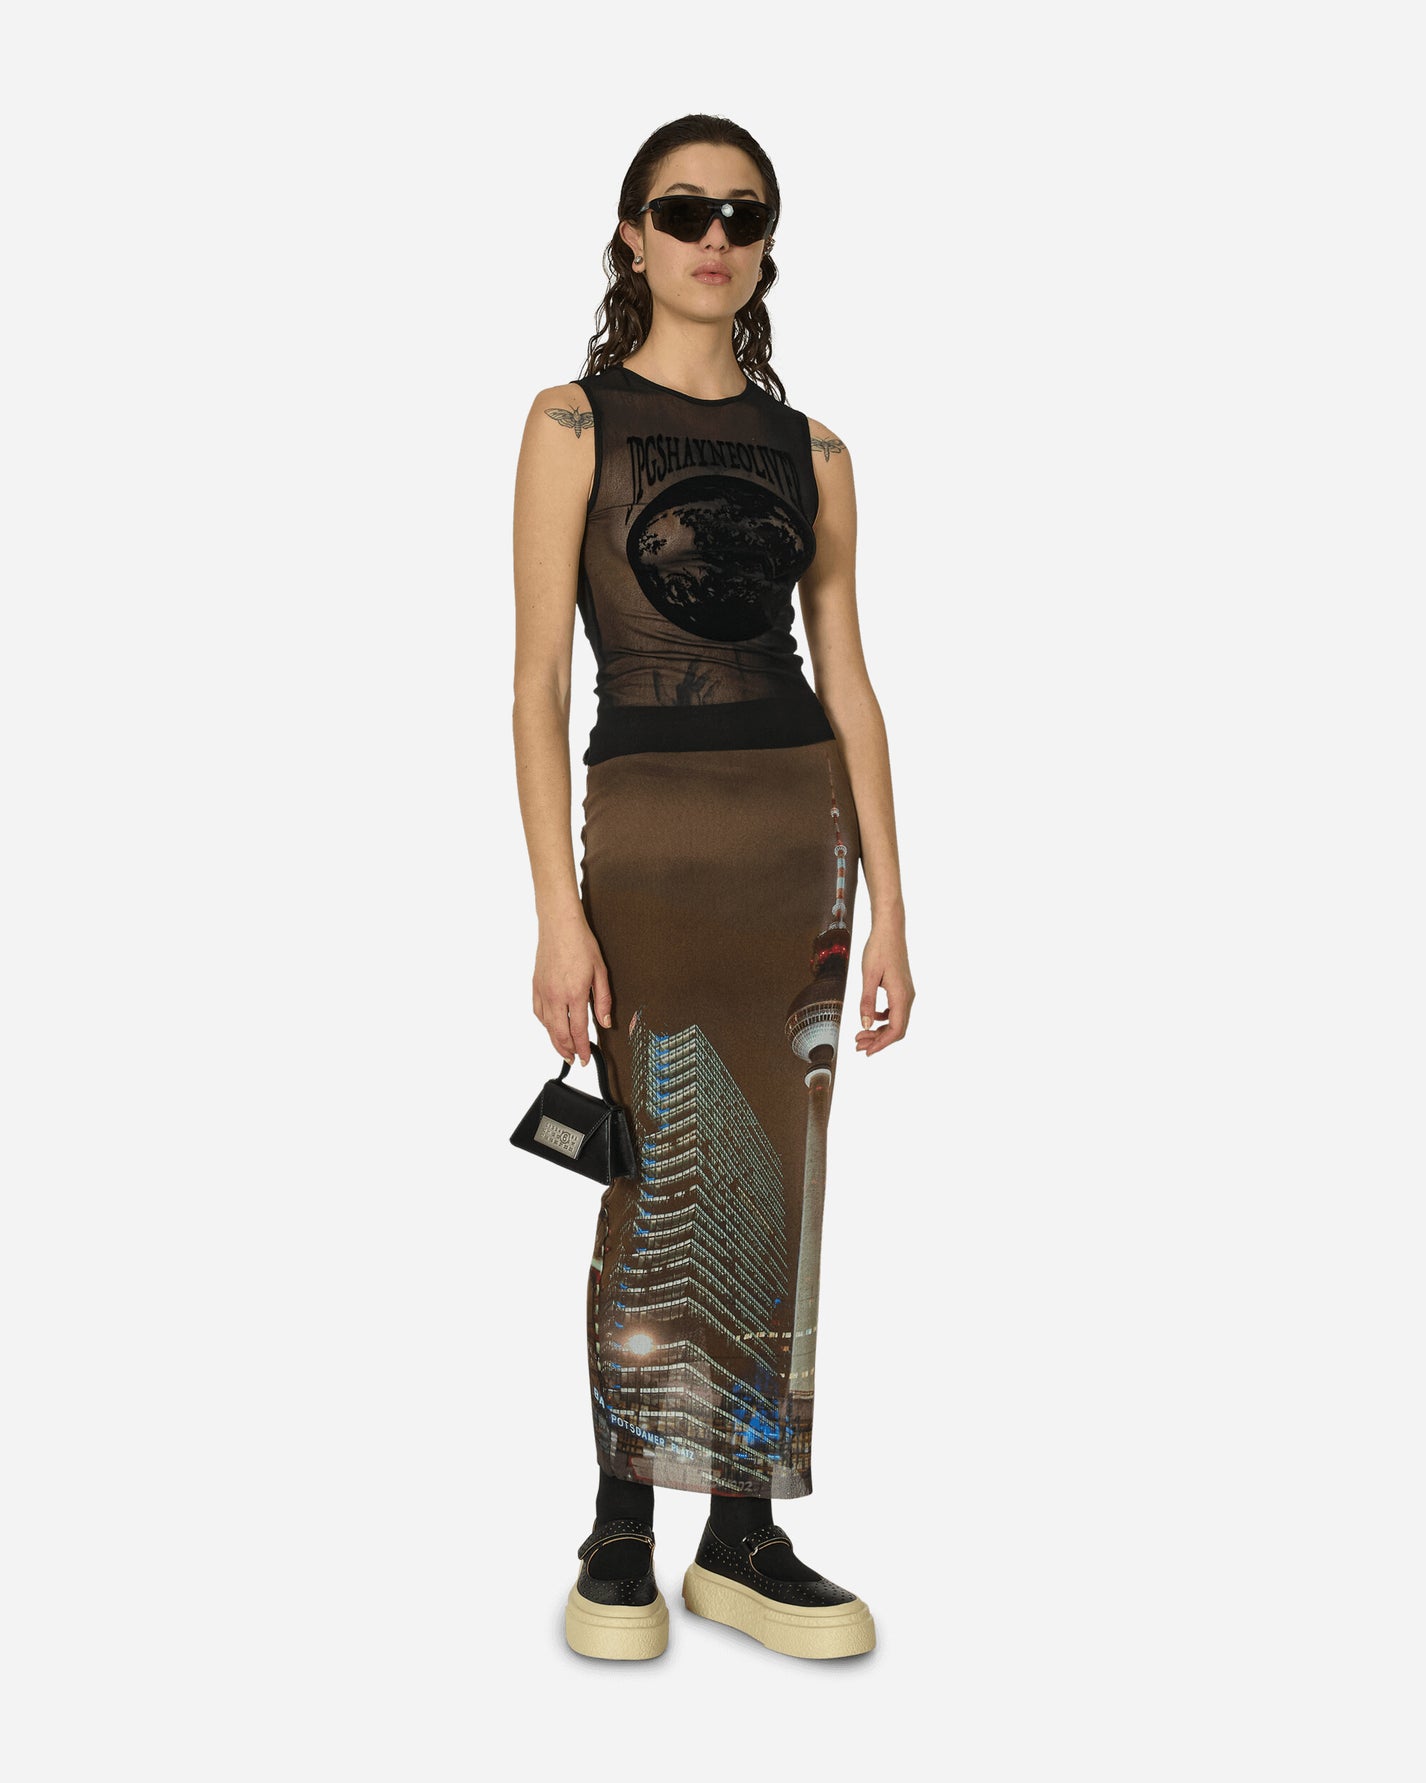 Jean Paul Gaultier Wmns Mesh Tank Top Flocked Earth Black T-Shirts Cropped DB033I-T001 0000